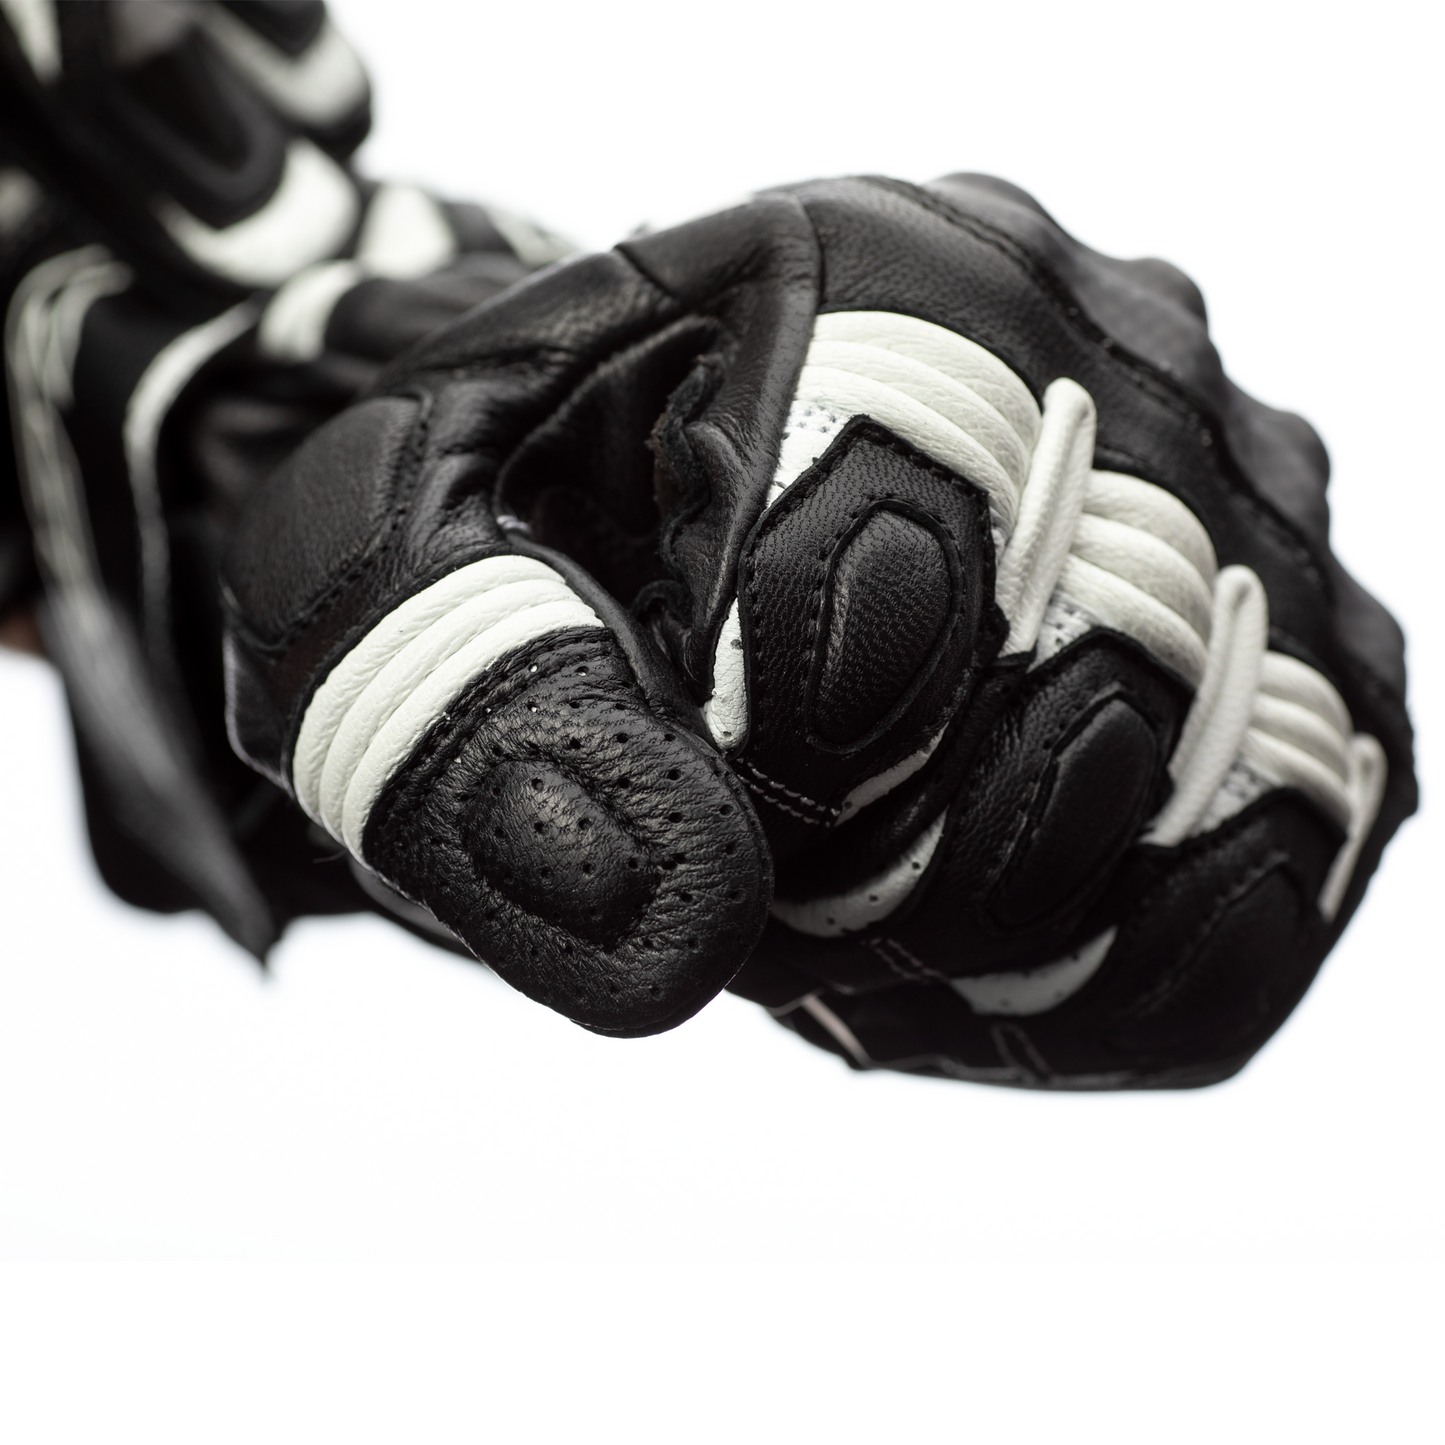 RST Axis Leather Riding Gloves - CE APPROVED - White